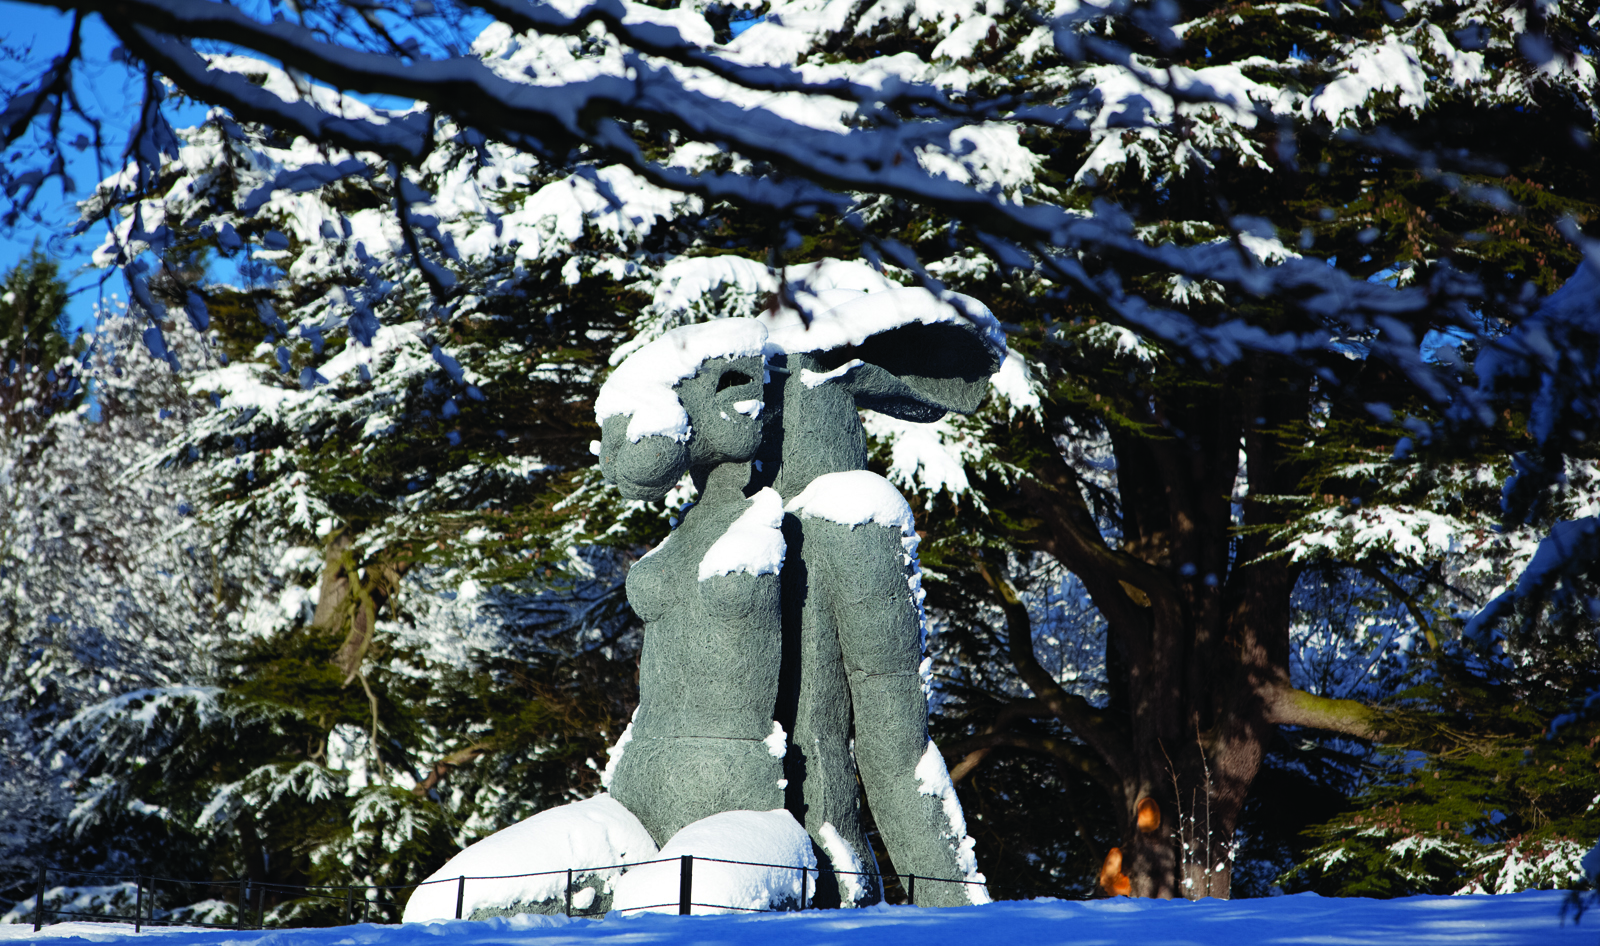 A sculpture with a woman's body and a rabbit head, covered in snow